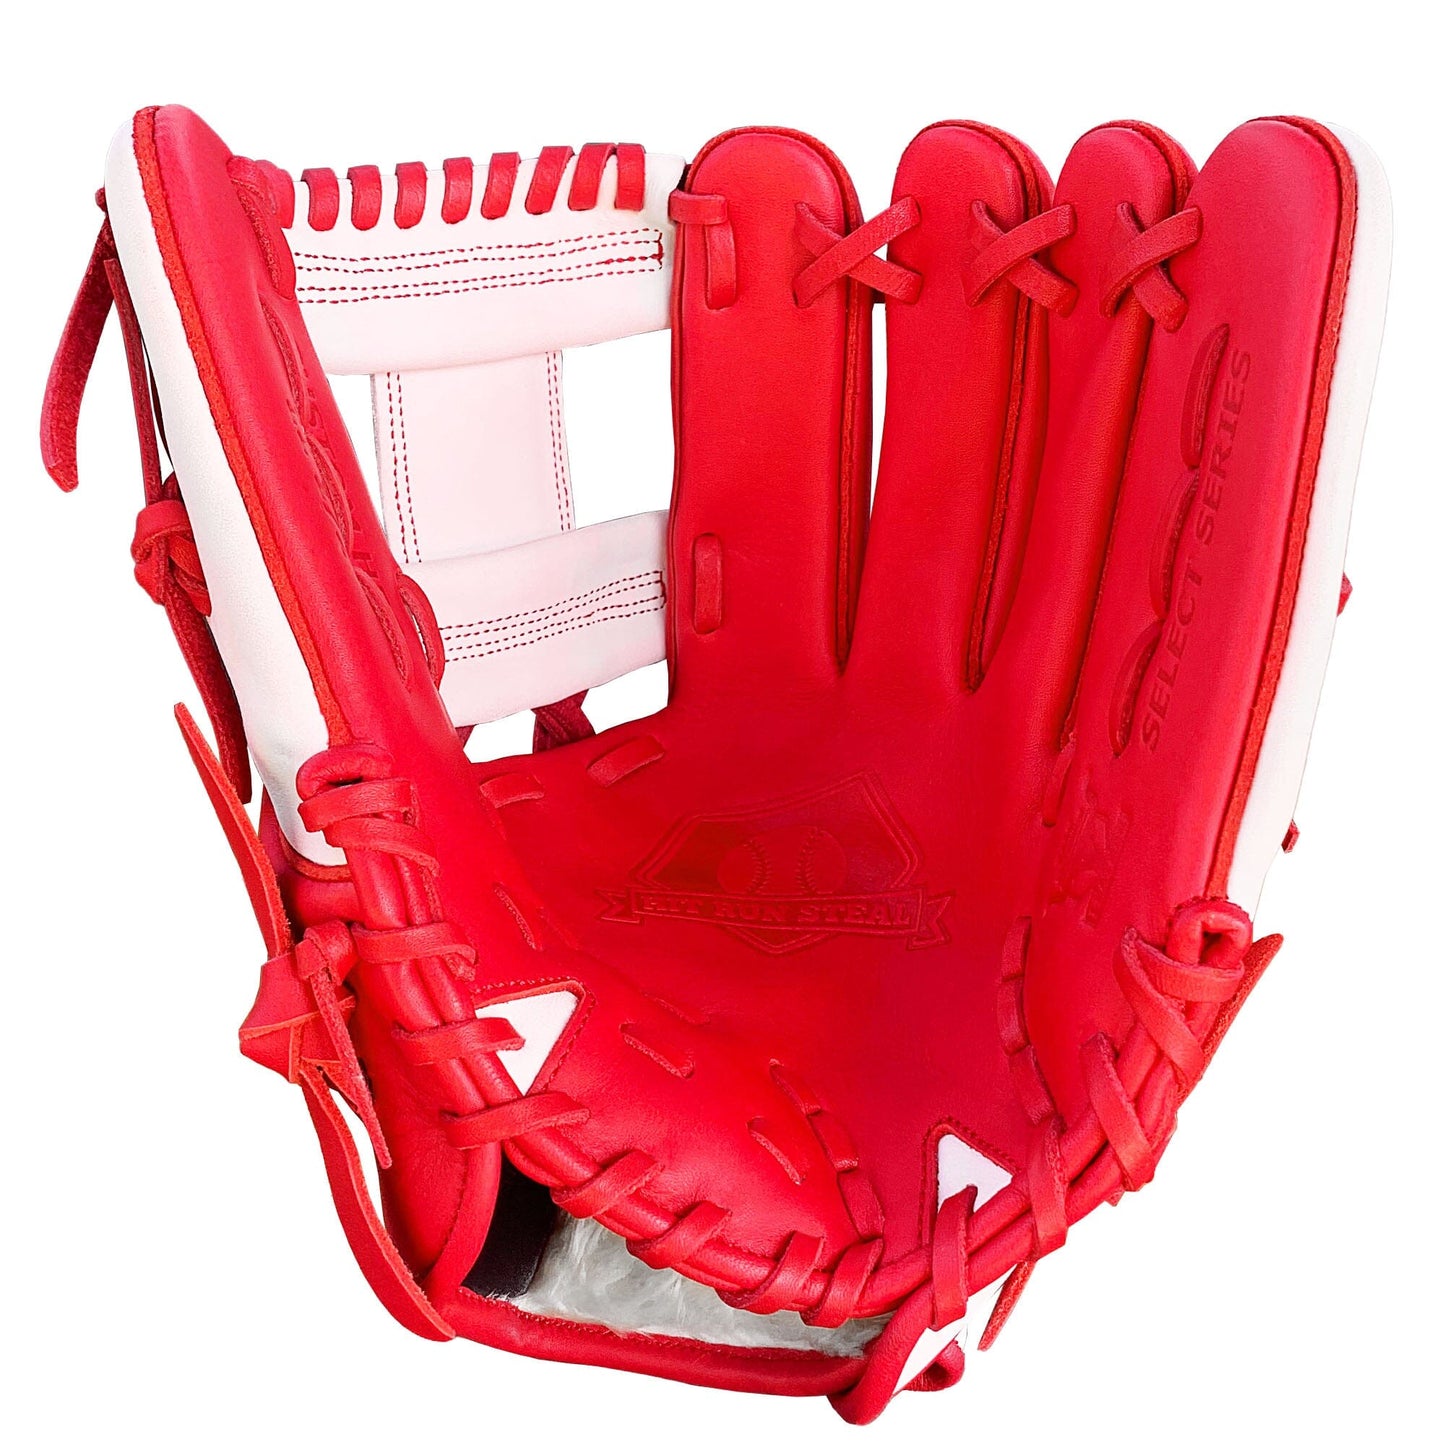 11.5" - Red and White - I Web